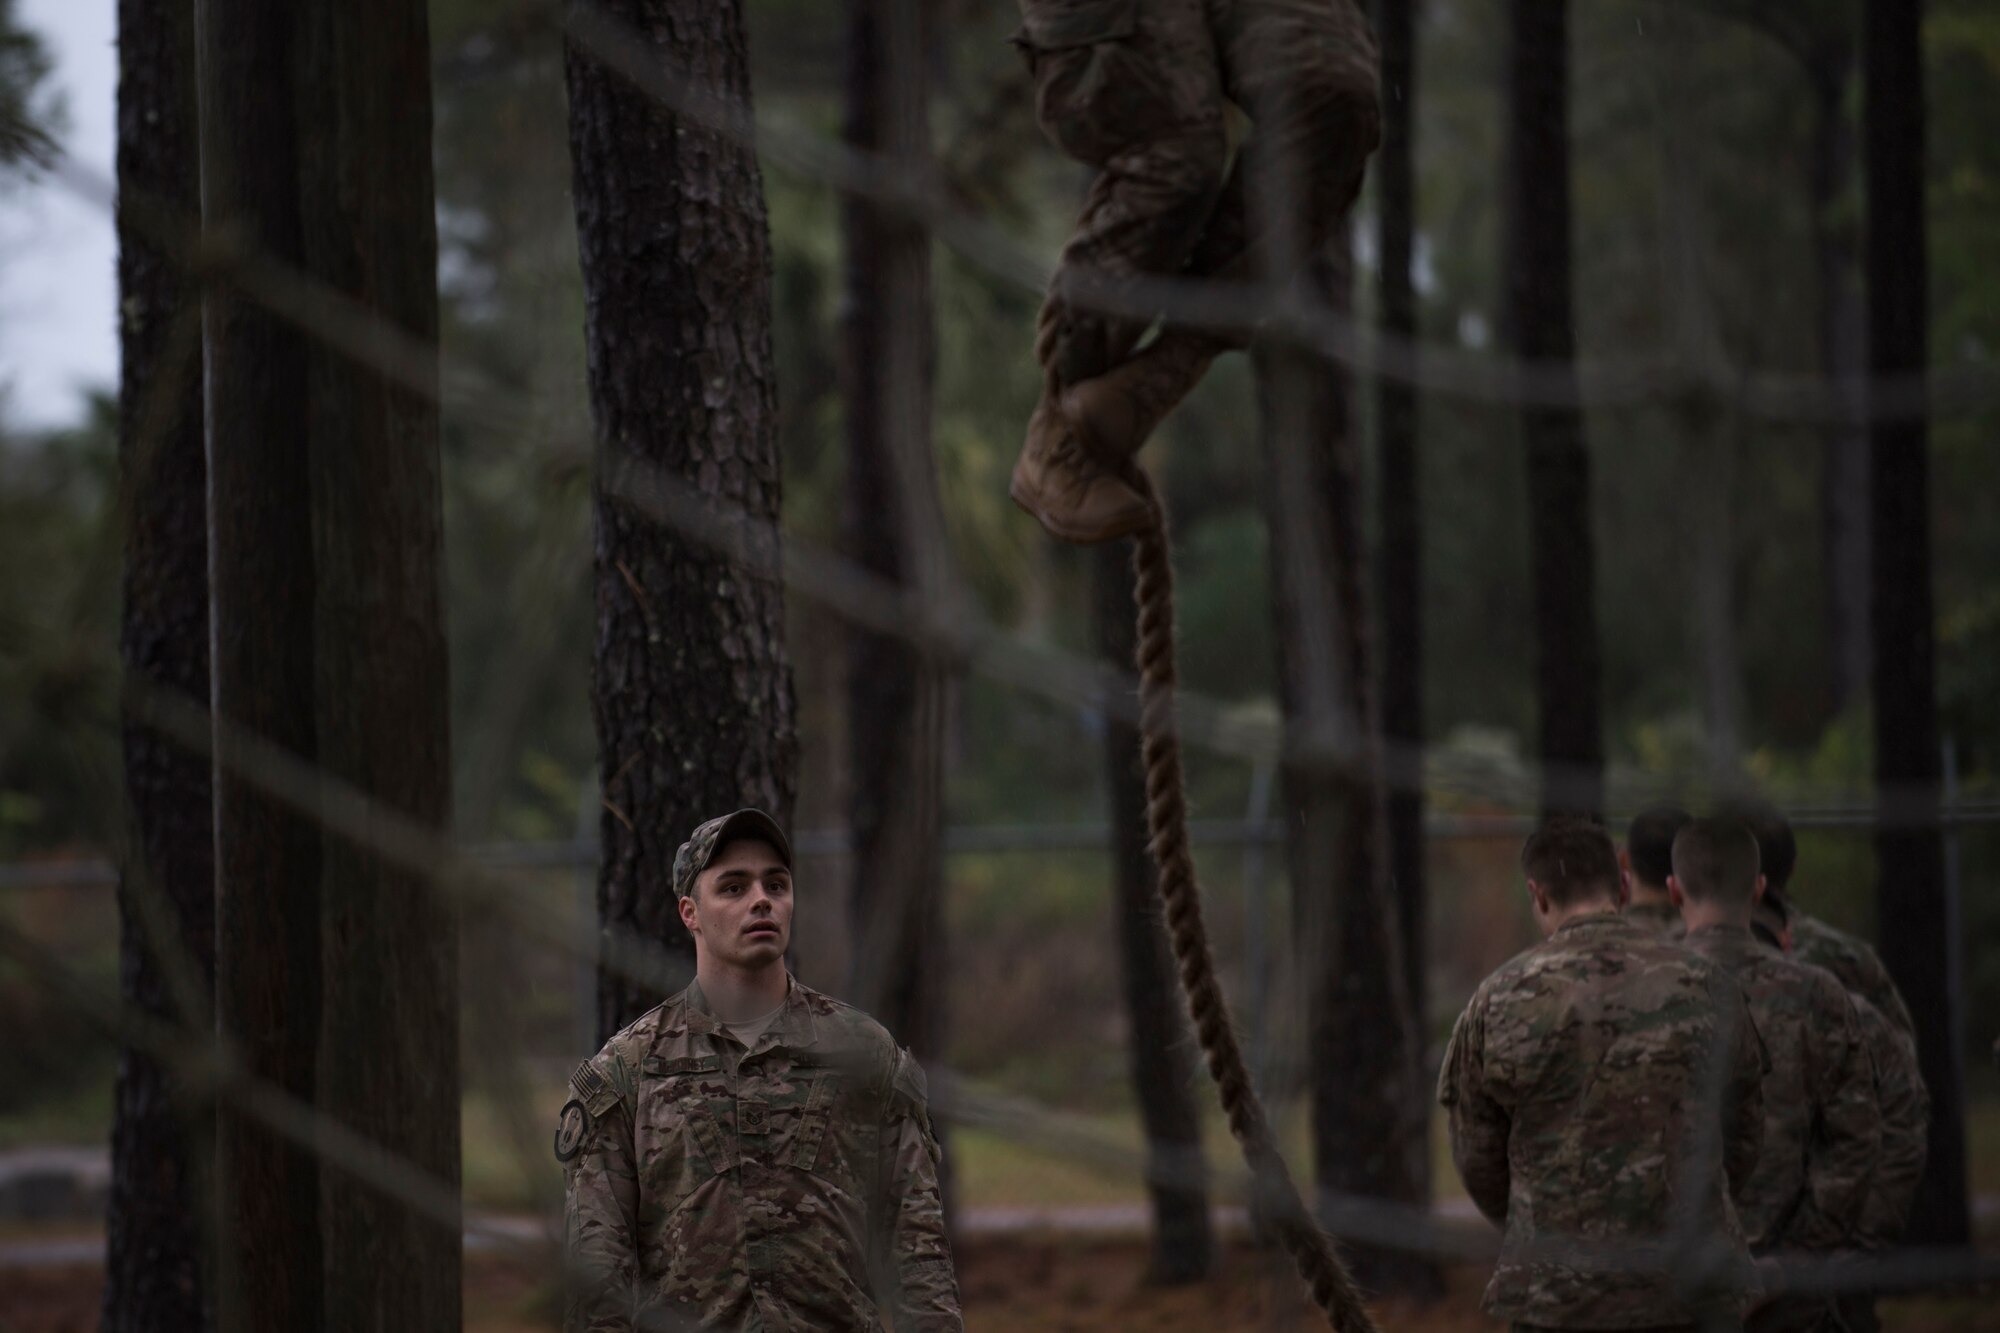 Staff Sgt. James McKinney, 823d Base Defense Squadron fireteam leader and cadre team member, watches candidates attempt an obstacle during an Army Air Assault readiness assessment, Dec. 7, 2017, at Camp Blanding, Fla. The AAA readiness assessment is designed to prepare Airmen for the Army Air Assault School curriculum as well as its physical and mental stressors. During AAA, U.S. troops are taught an array of skills associated with rotary-winged aircraft. These skills widen the 820th Base Defense Group’s ability to swiftly deploy and defend. (U.S. Air Force photo by Senior Airman Daniel Snider)